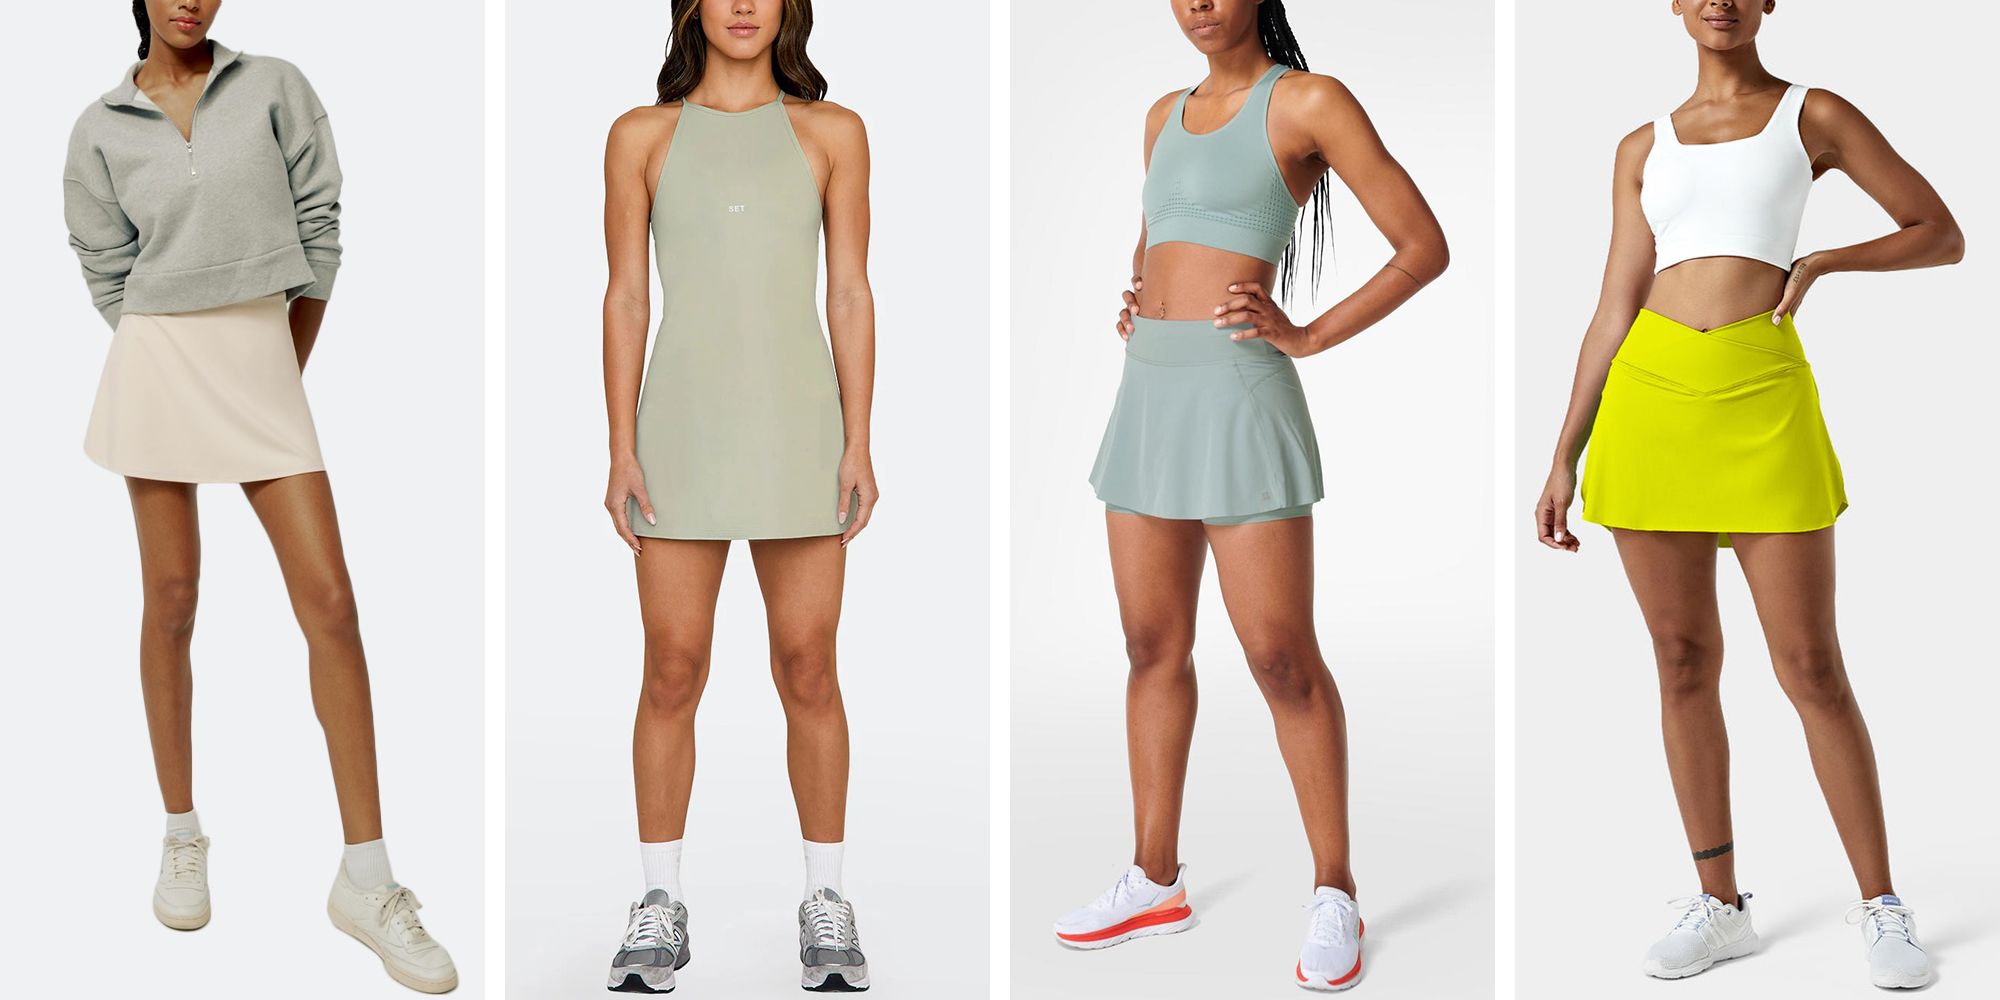 golf skirt outfits for women｜TikTok Search